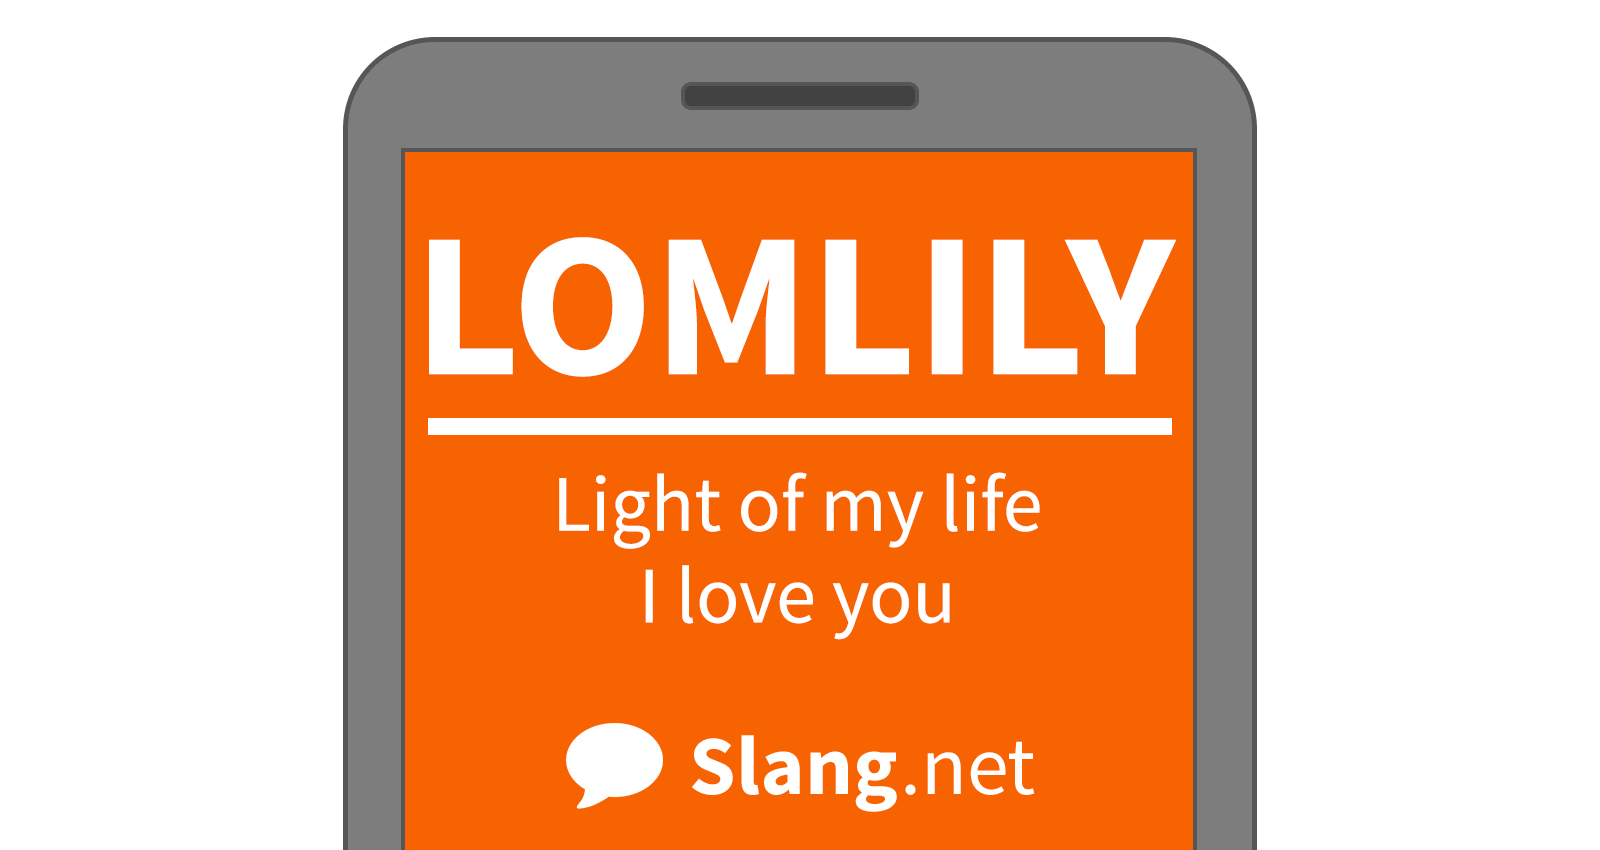 You will likely see LOMLILY in online messages and texts from hopeless romantics